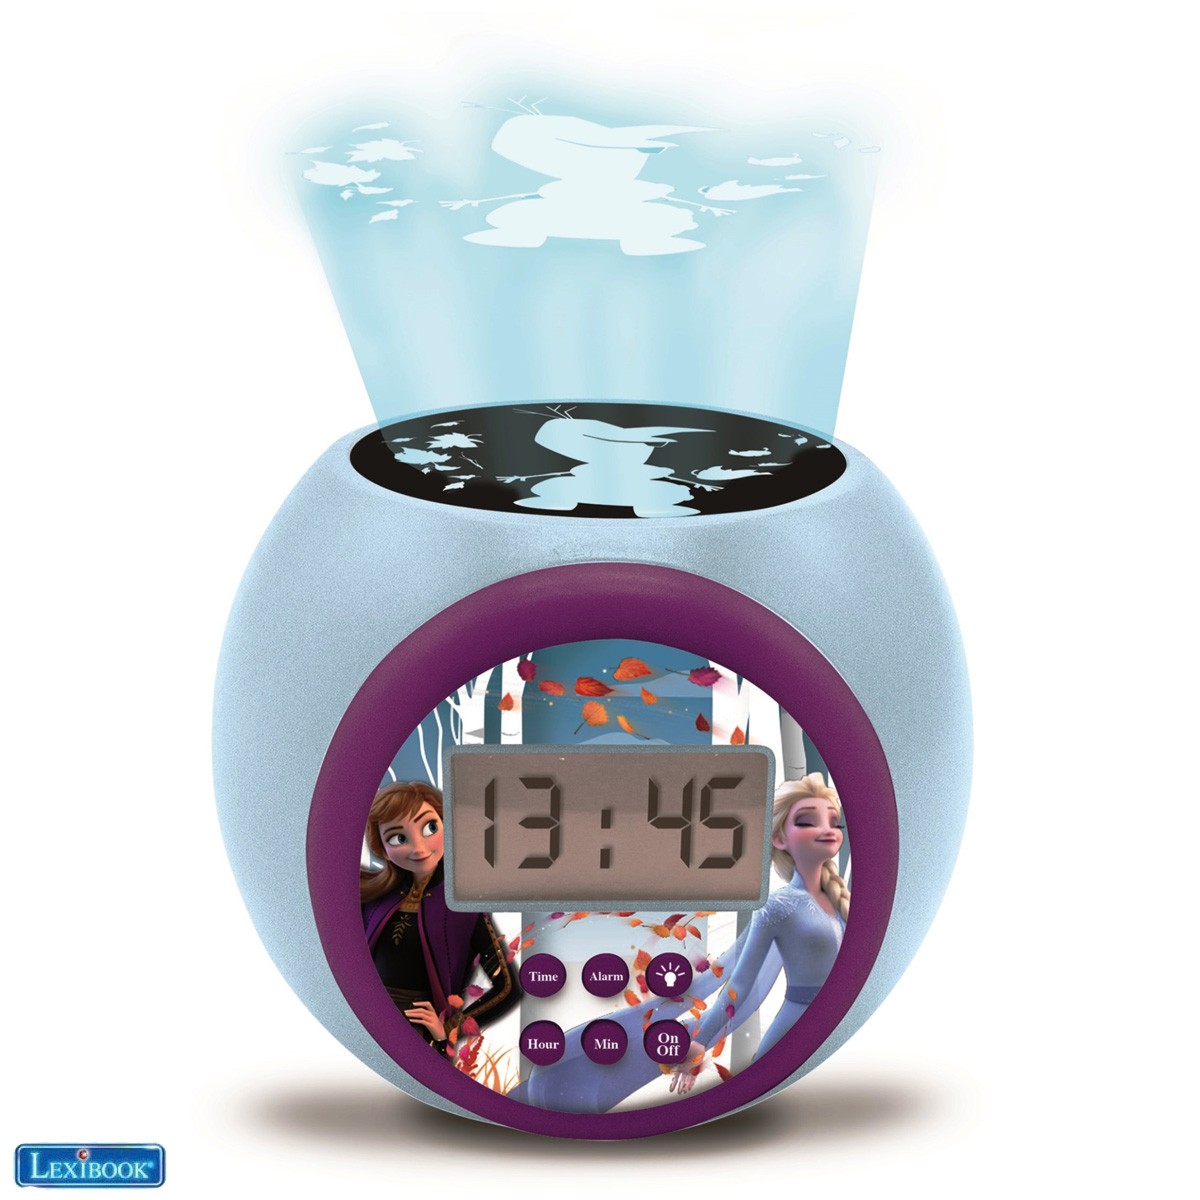  Projector Alarm Clock Disney Frozen 2 Anna Elsa with snooze function and alarm function